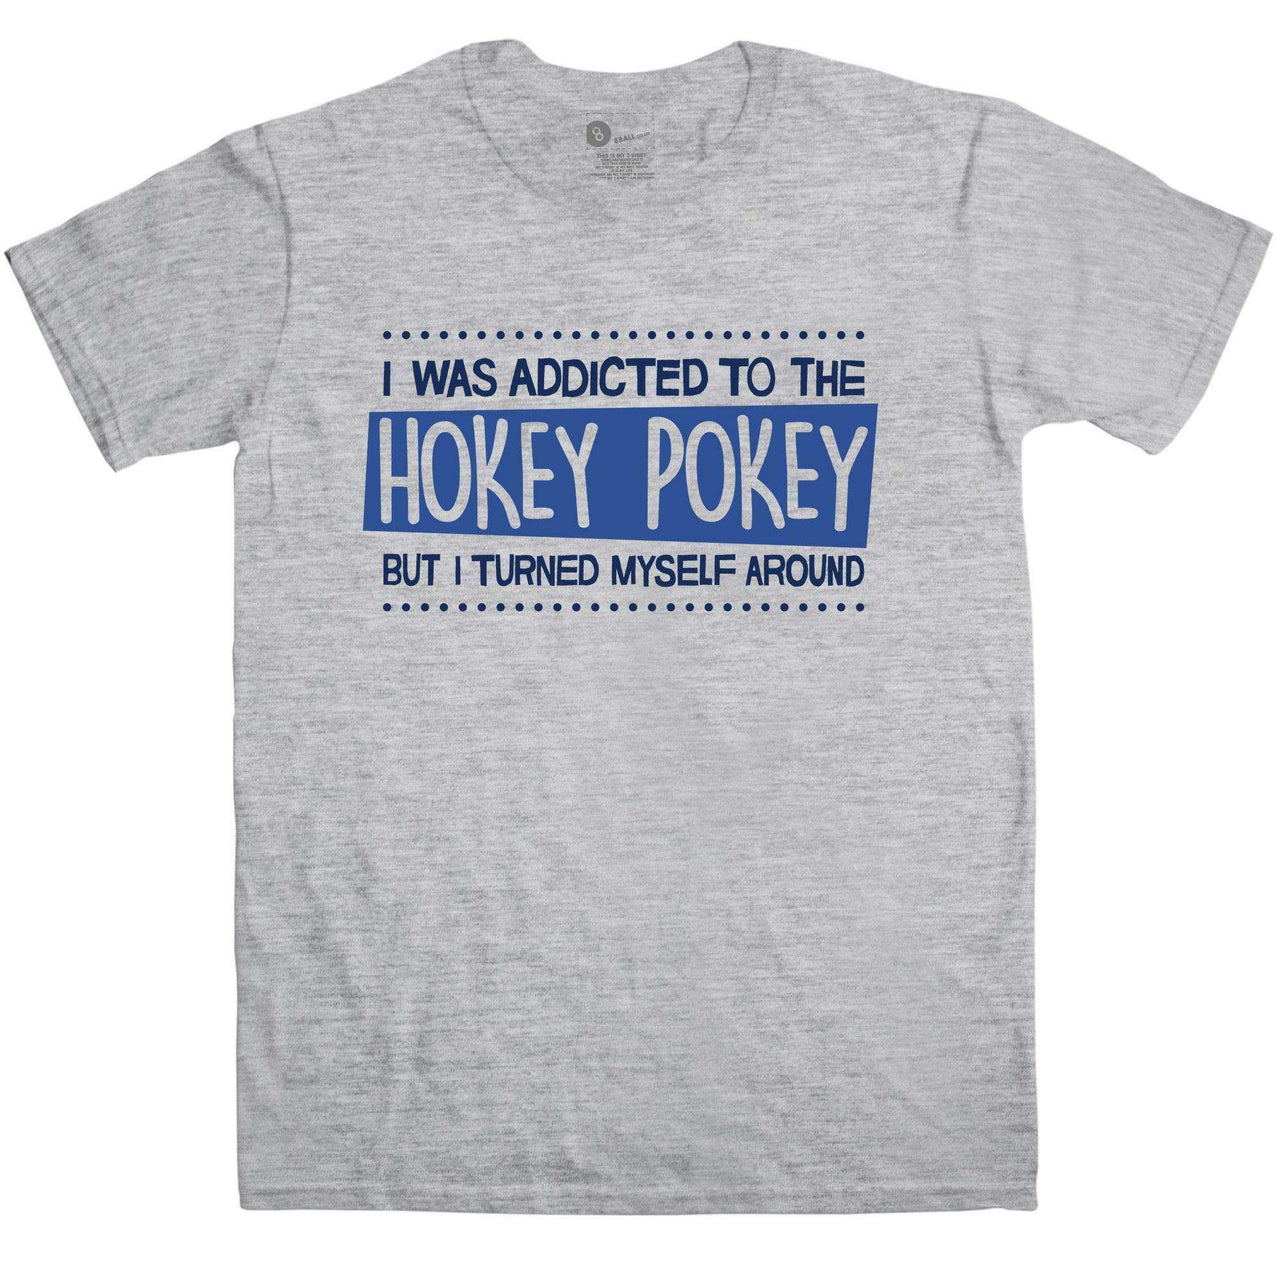 Addicted To The Hokey Pokey Funny Graphic T-Shirt For Men 8Ball